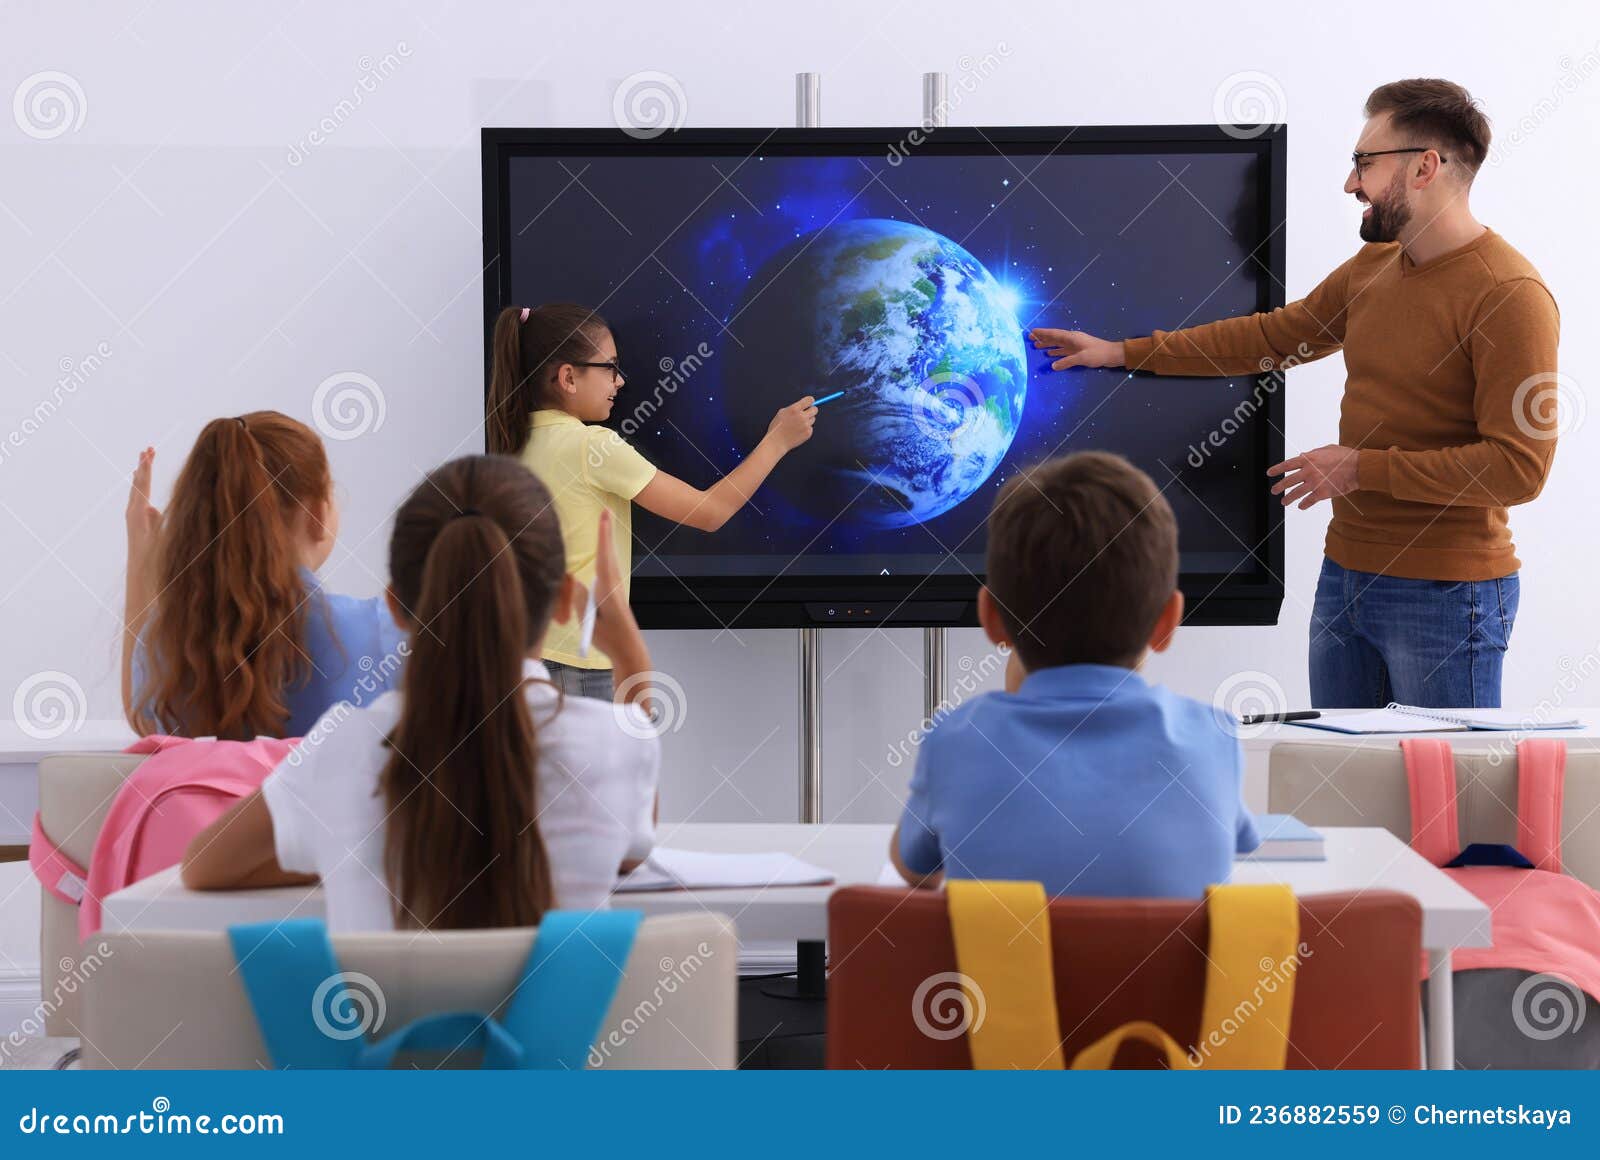 teacher and pupil using interactive board in classroom during lesson